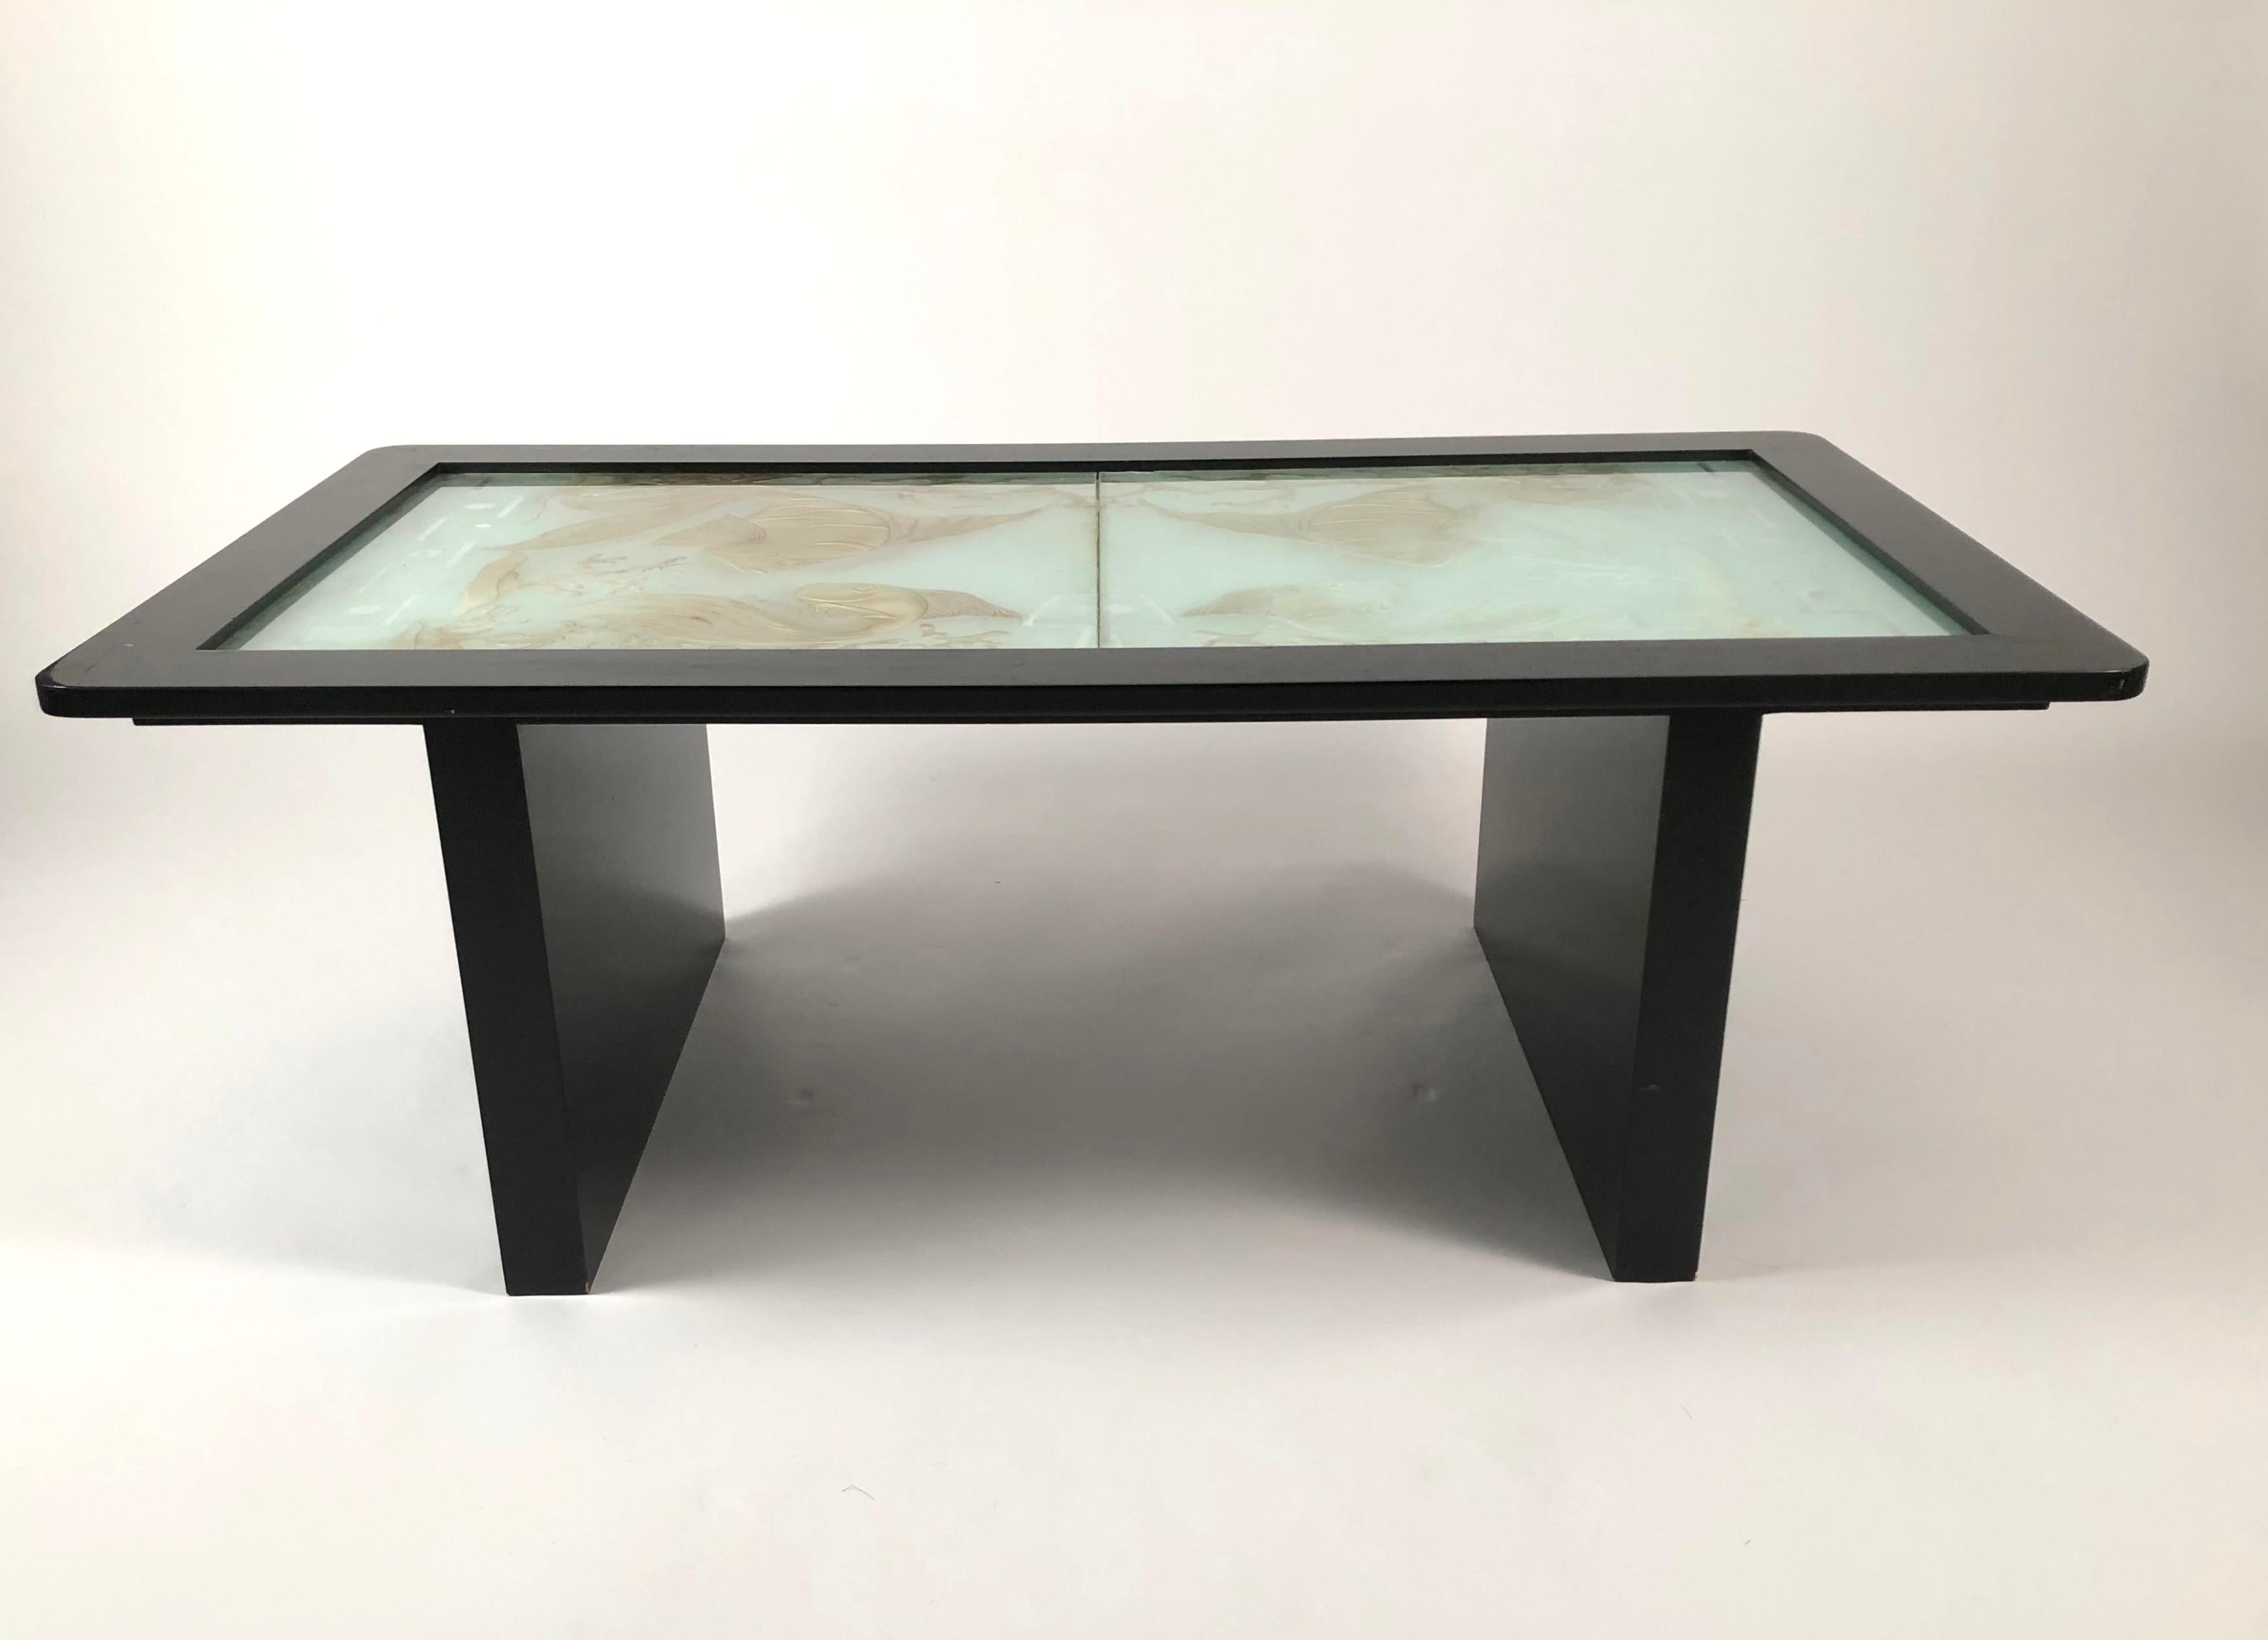 A coffee, or cocktail, table of rectangular form, with an Art Deco period etched and silver and gold highlighted glass top, in 2 panels, decorated with fish, coral and geometric bands and circles. The ebonized black lacquered frame and legs are very